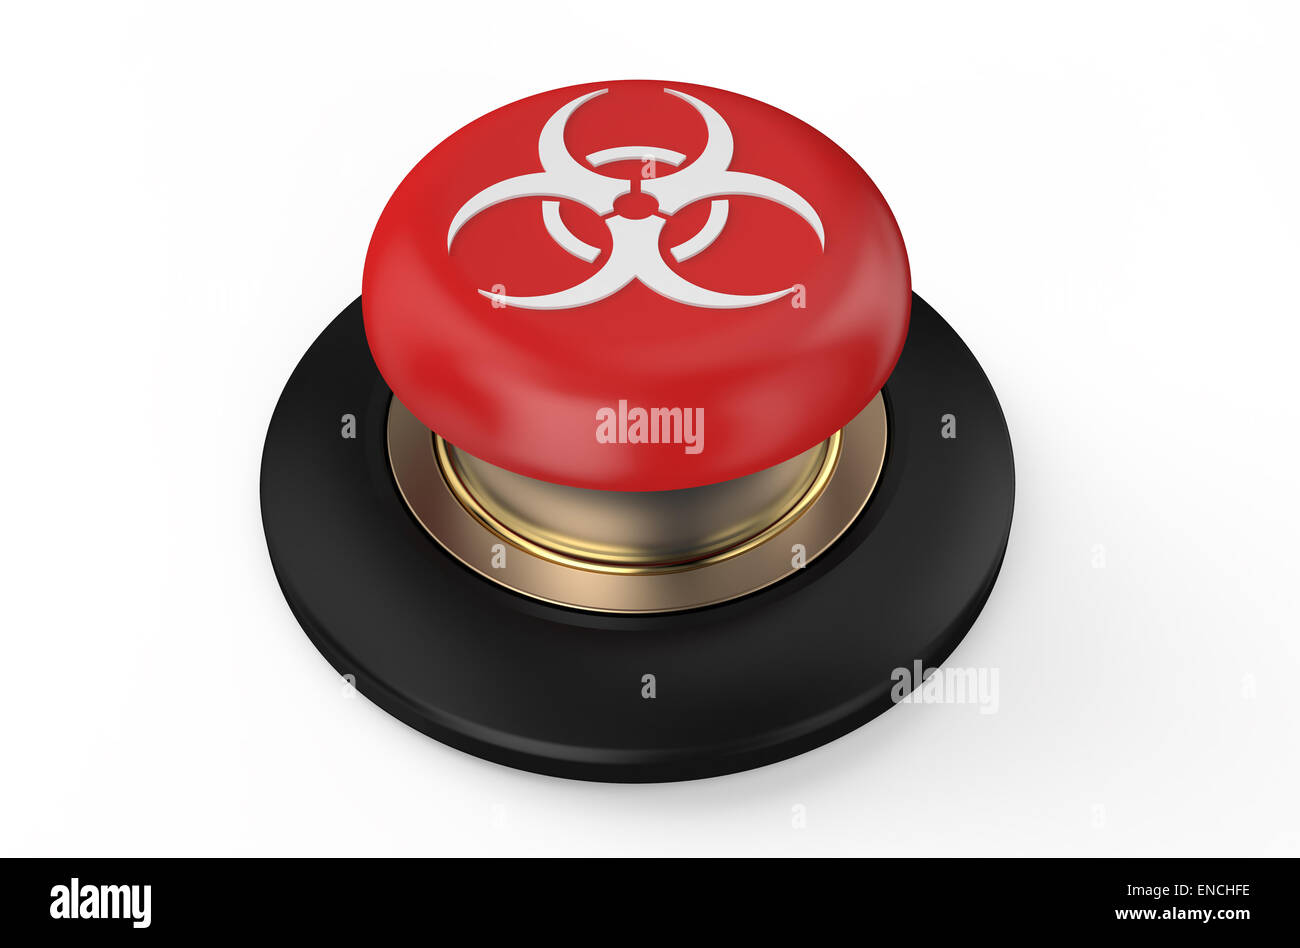 Biological hazard red button isolated on white background Stock Photo